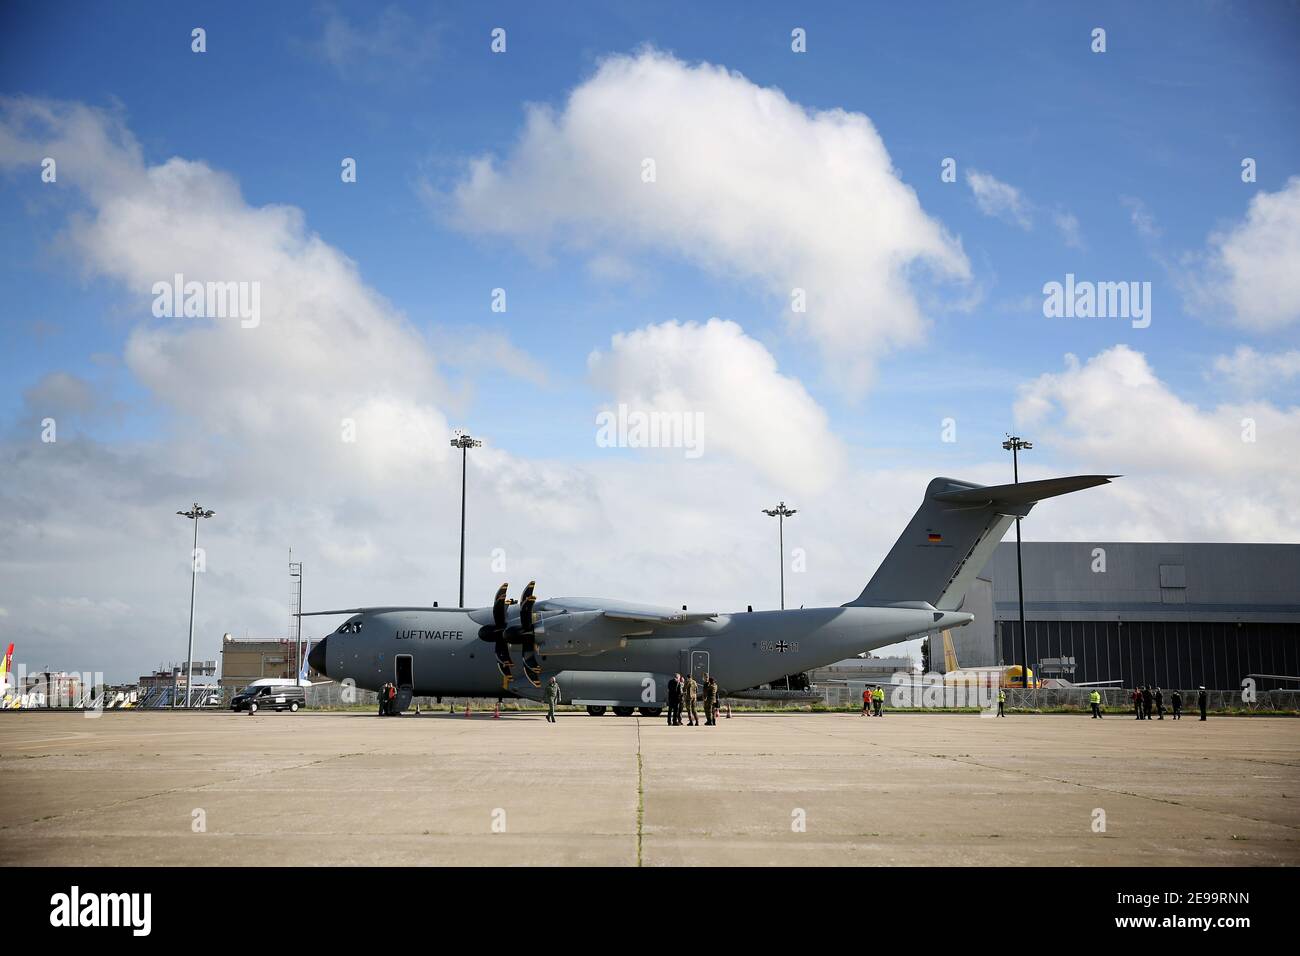 Lisbon, Portugal. 3rd Feb, 2021. A military transport plane of the German  Air Force is seen at Figo Maduro military airbase in Lisbon, Portugal, on  Feb. 3, 2021. Based on a bilateral